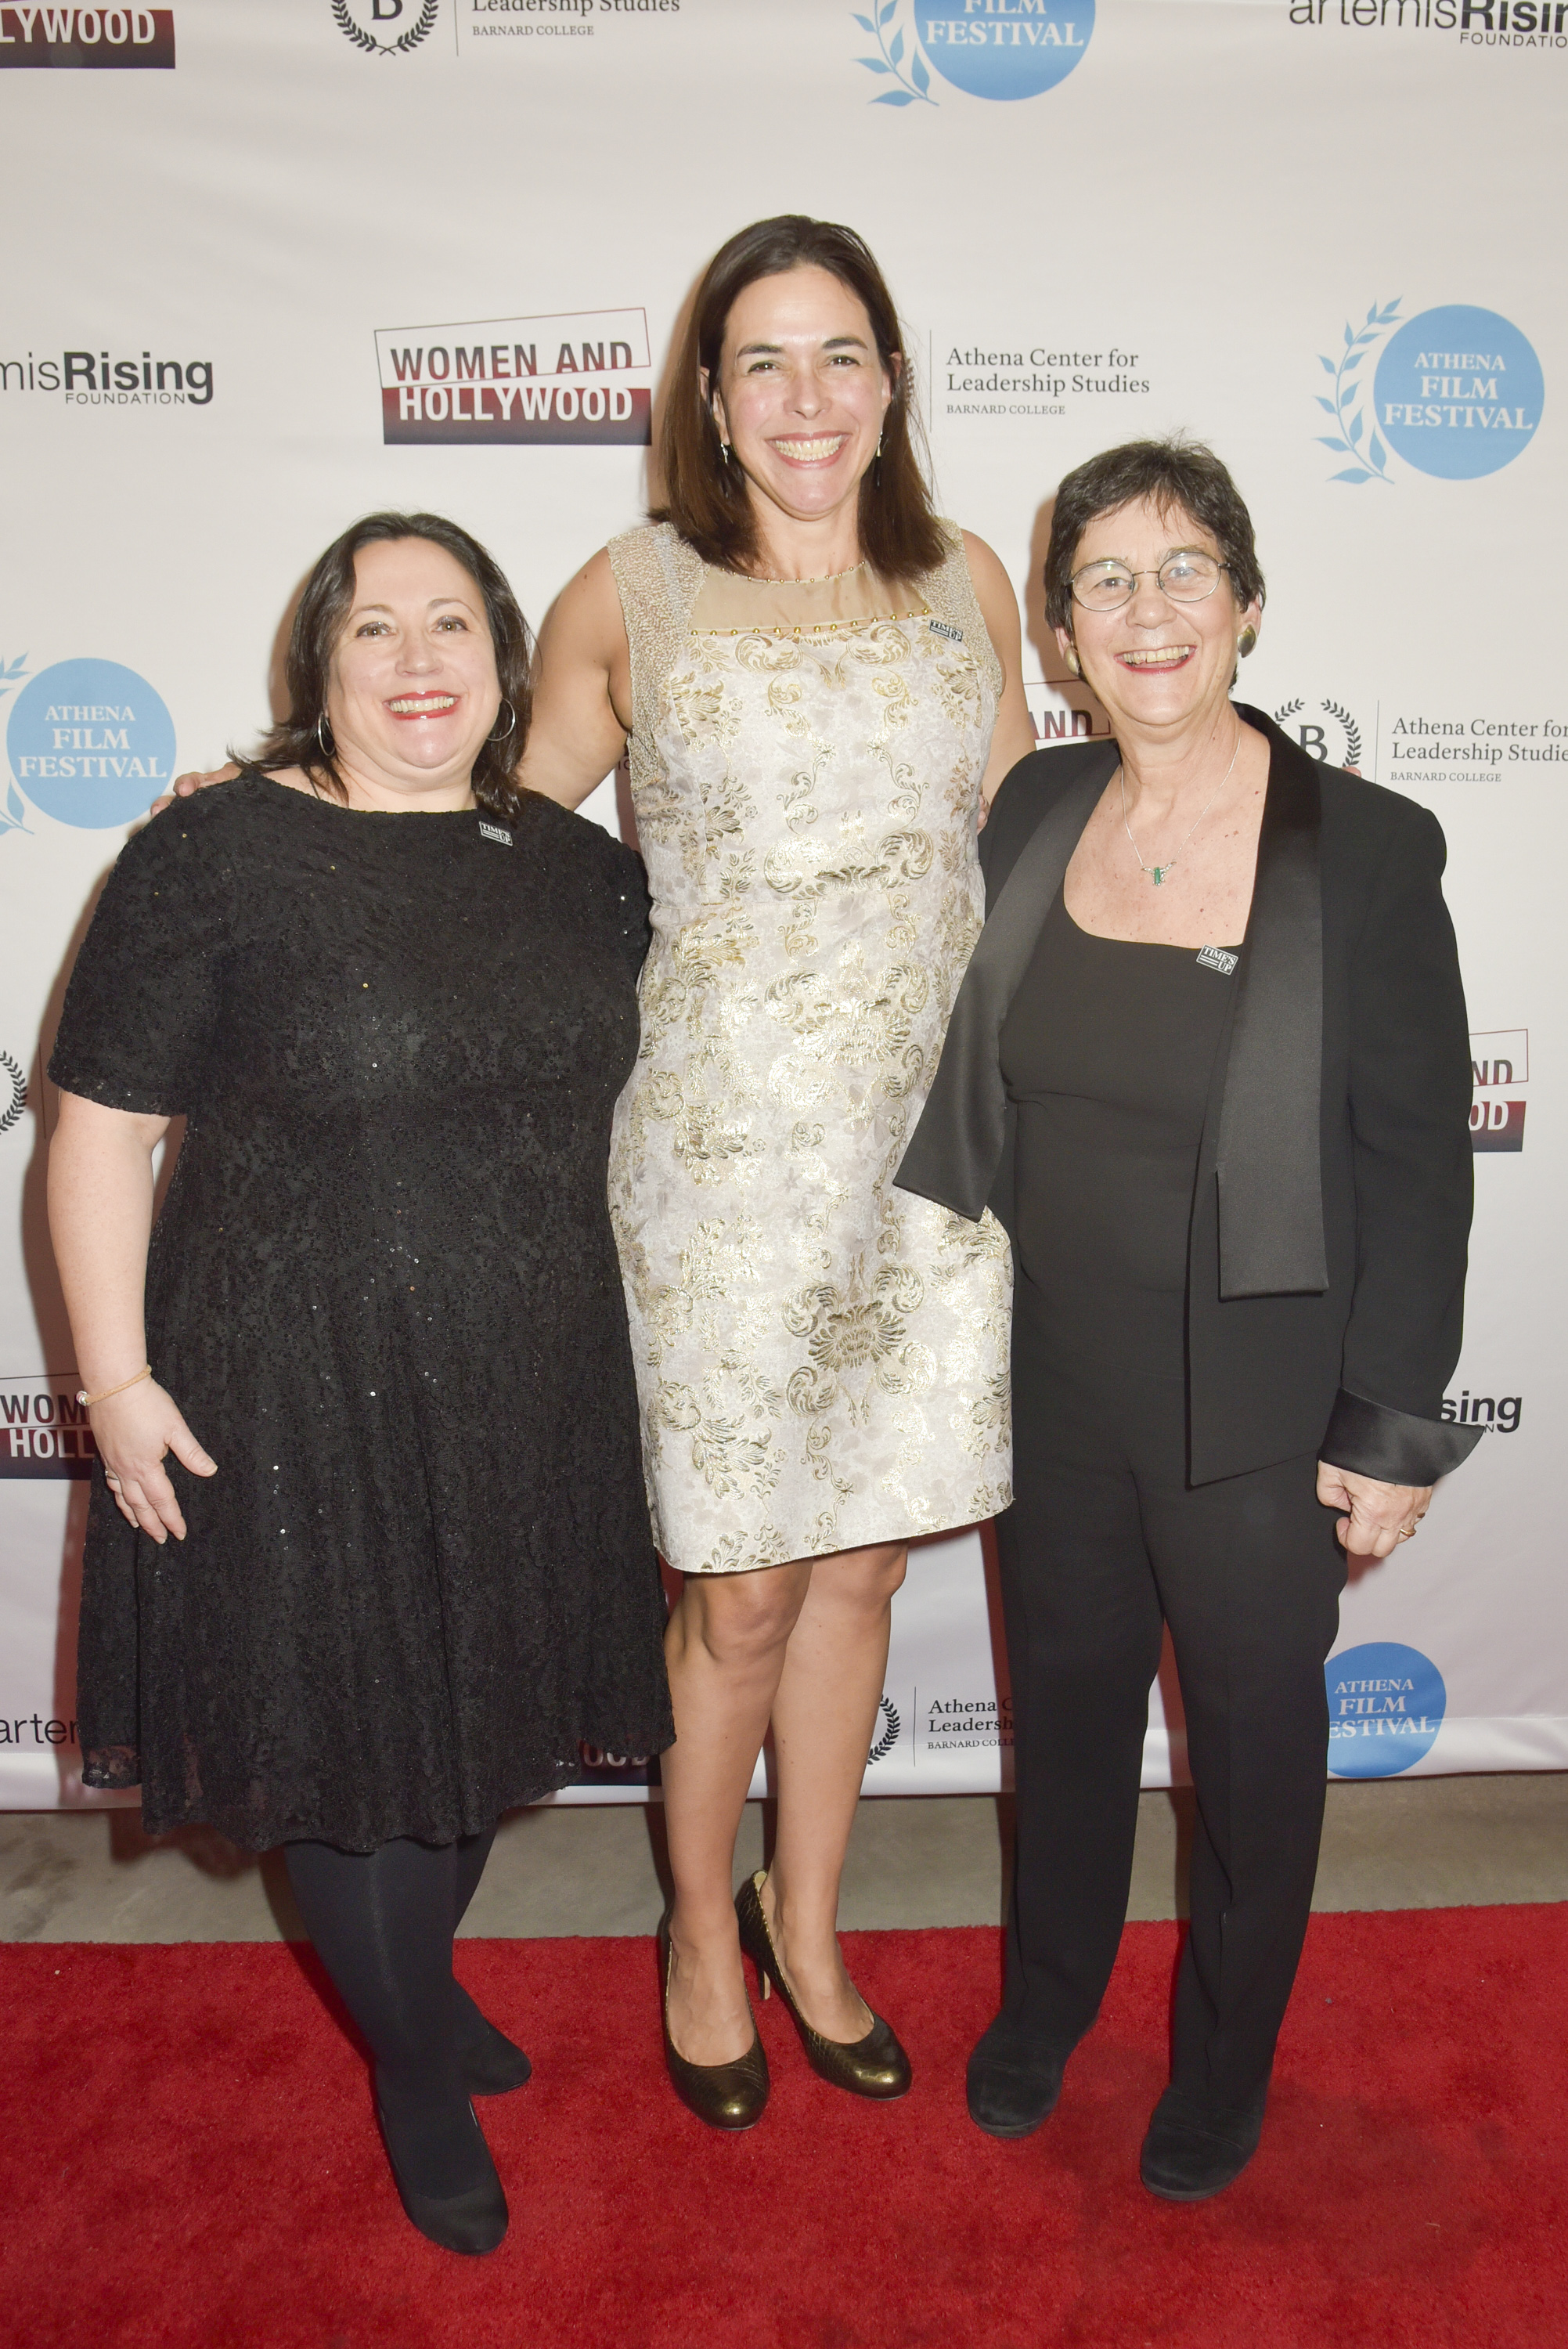 Melissa Silverstein, Sian Beilock and Kathryn Kolbert stand in front of a branded backdrop